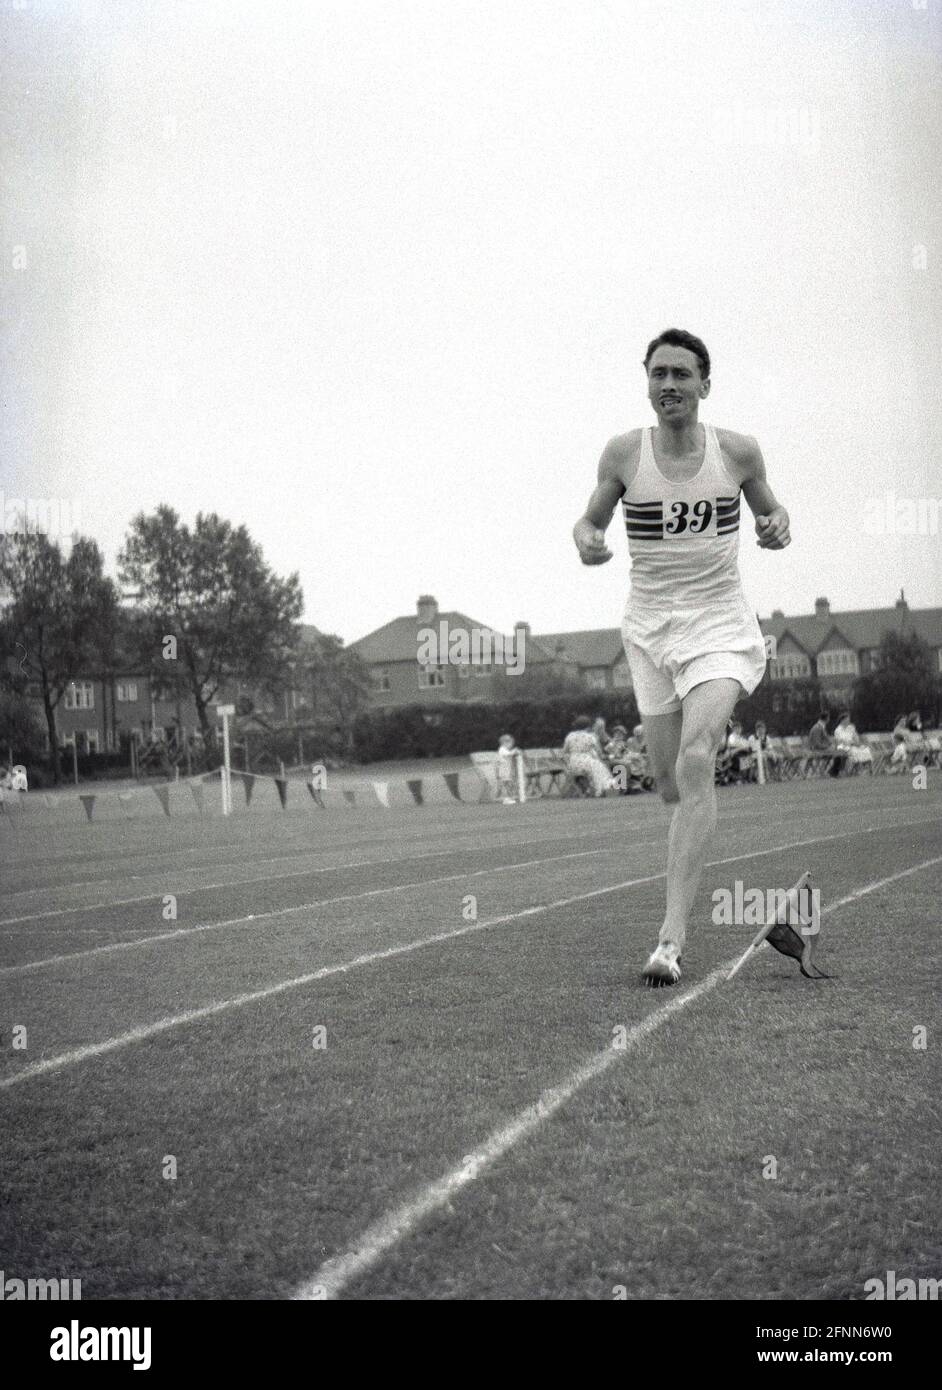 1954, historical, a male competitor outside running on a grass track at a civil service sports day, England, UK, an amateur sports event but competitive nonetheless. Stock Photo